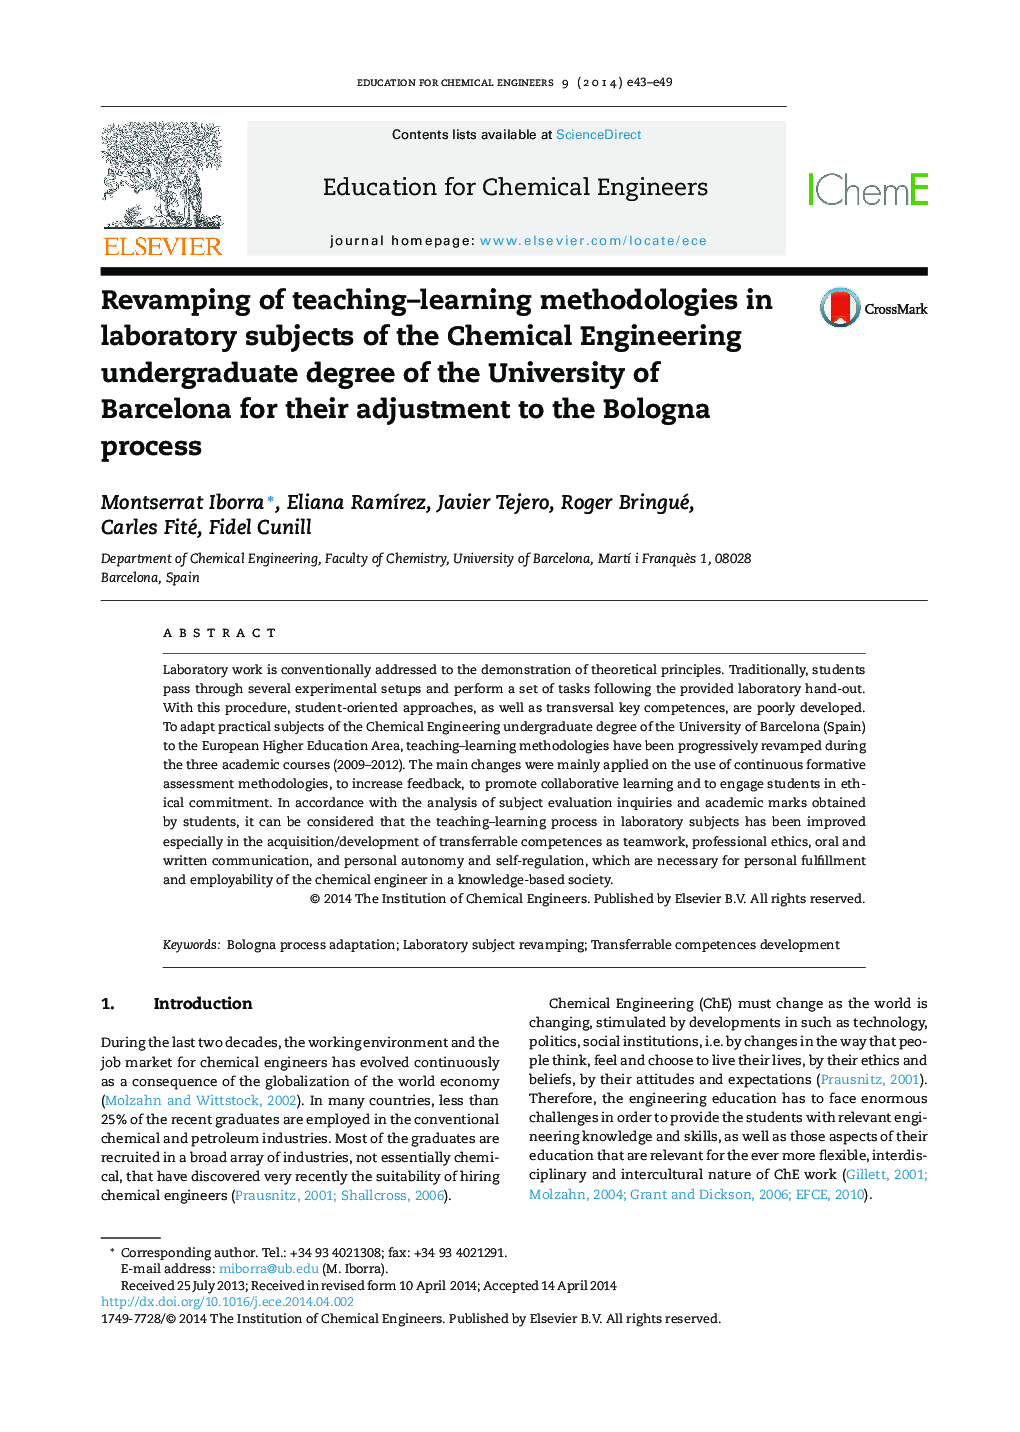 Revamping of teaching–learning methodologies in laboratory subjects of the Chemical Engineering undergraduate degree of the University of Barcelona for their adjustment to the Bologna process